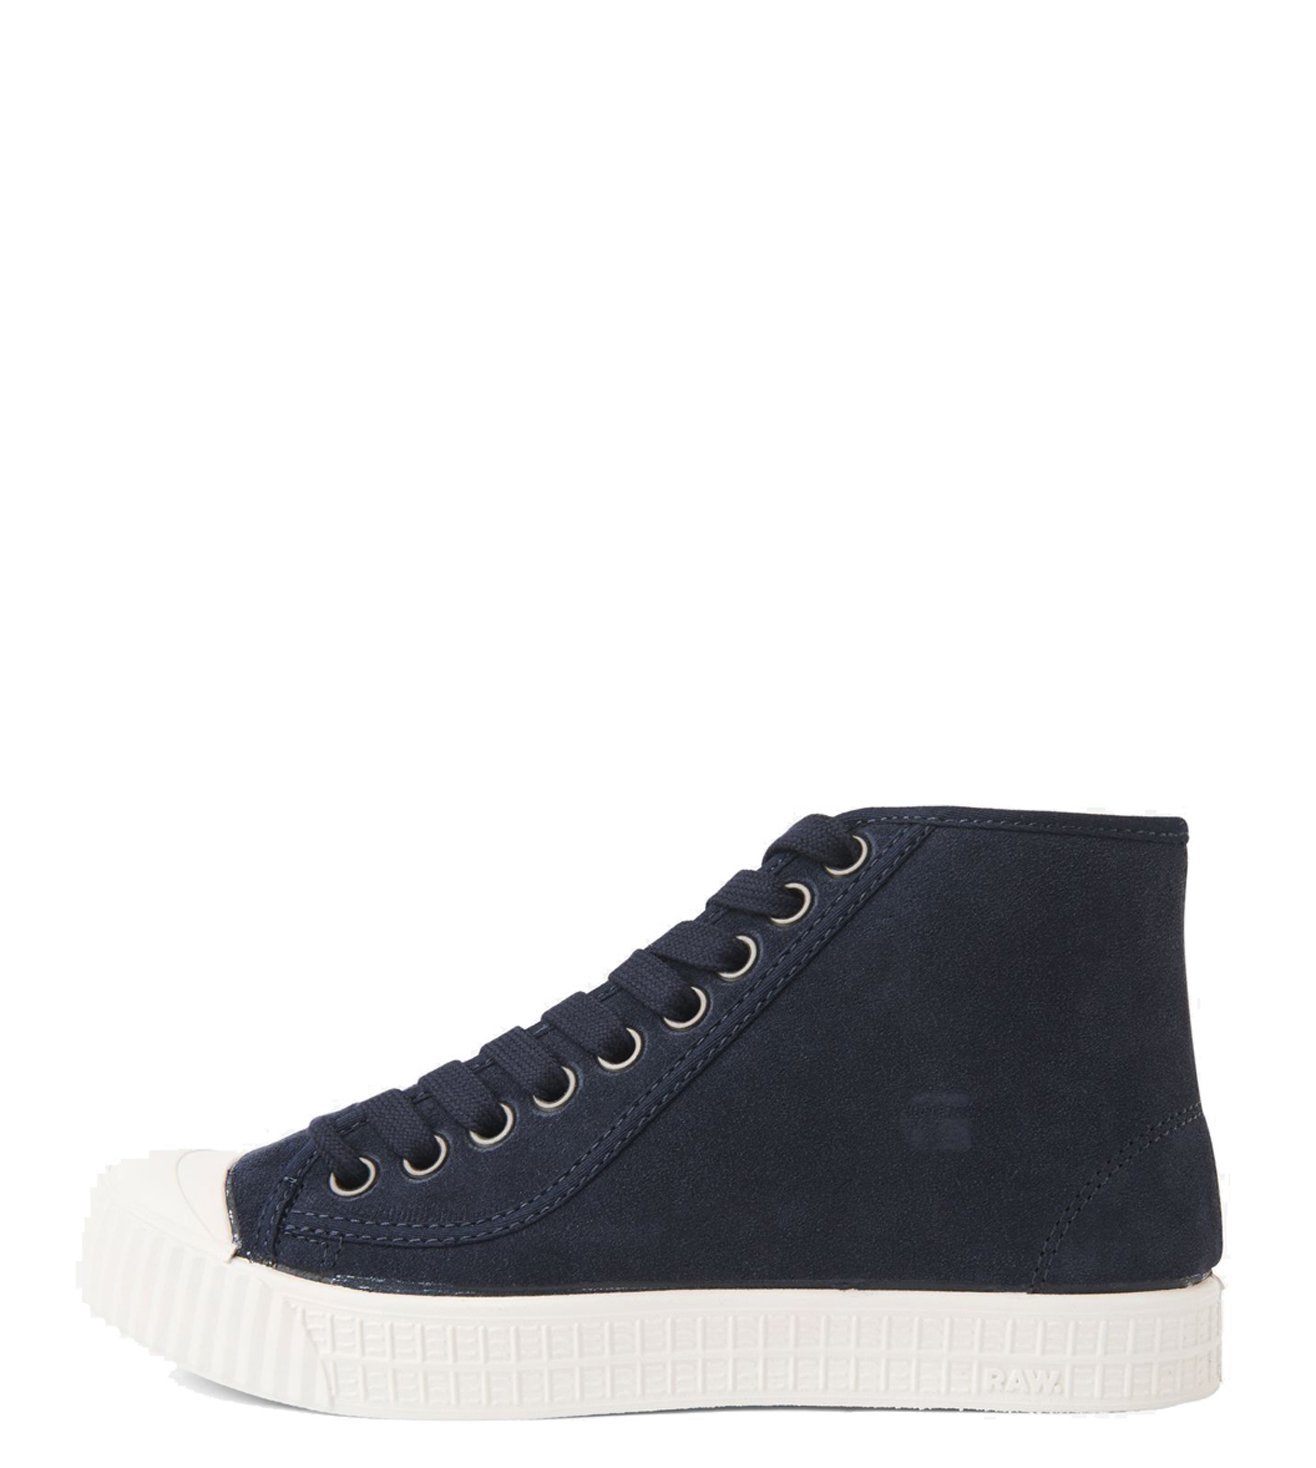 g star raw womens shoes